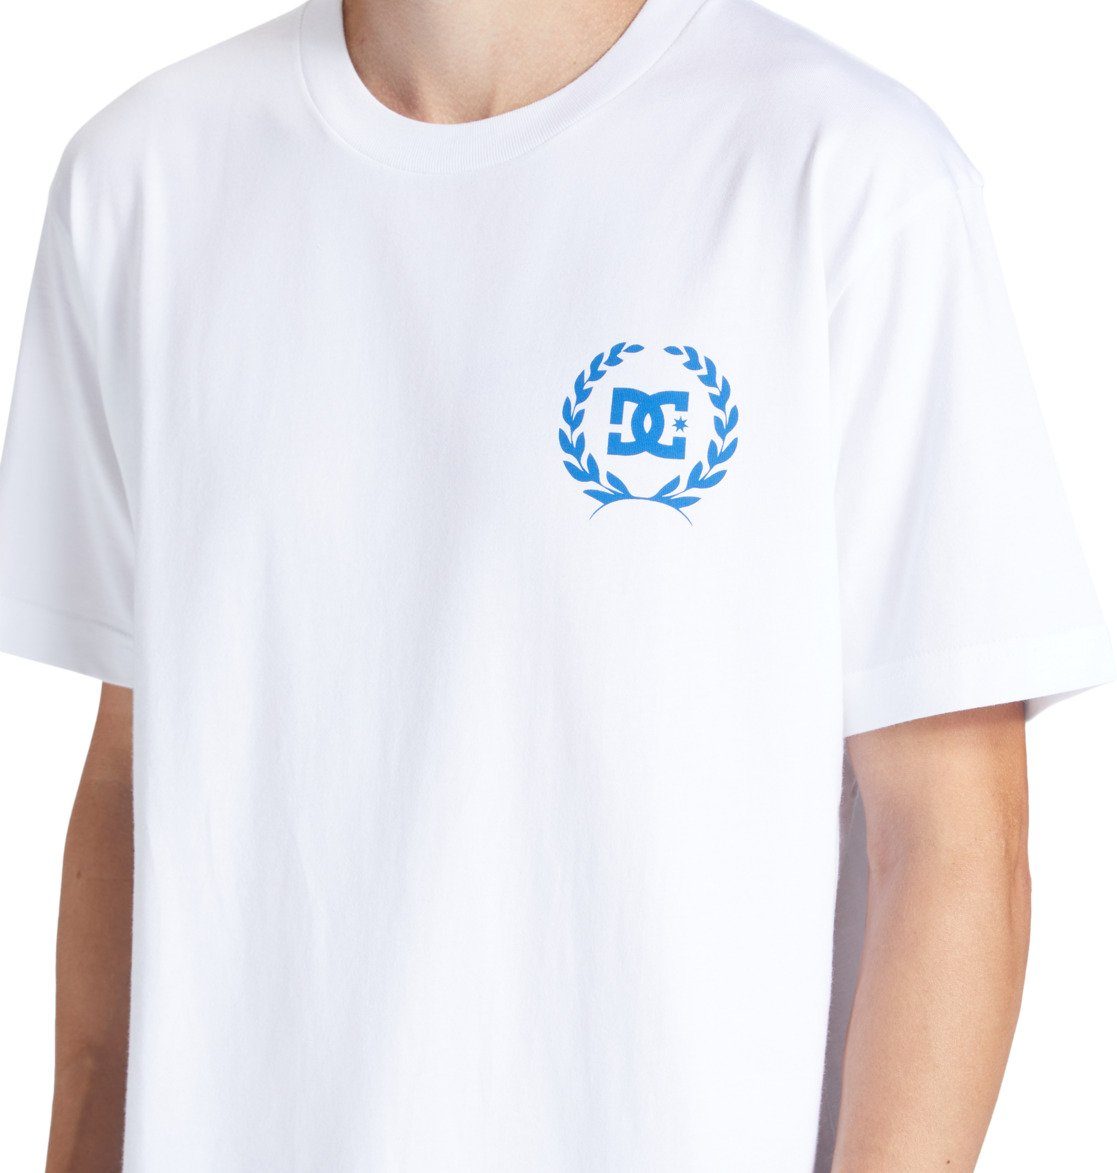 Lifes Changing White T-Shirt DC Shoes